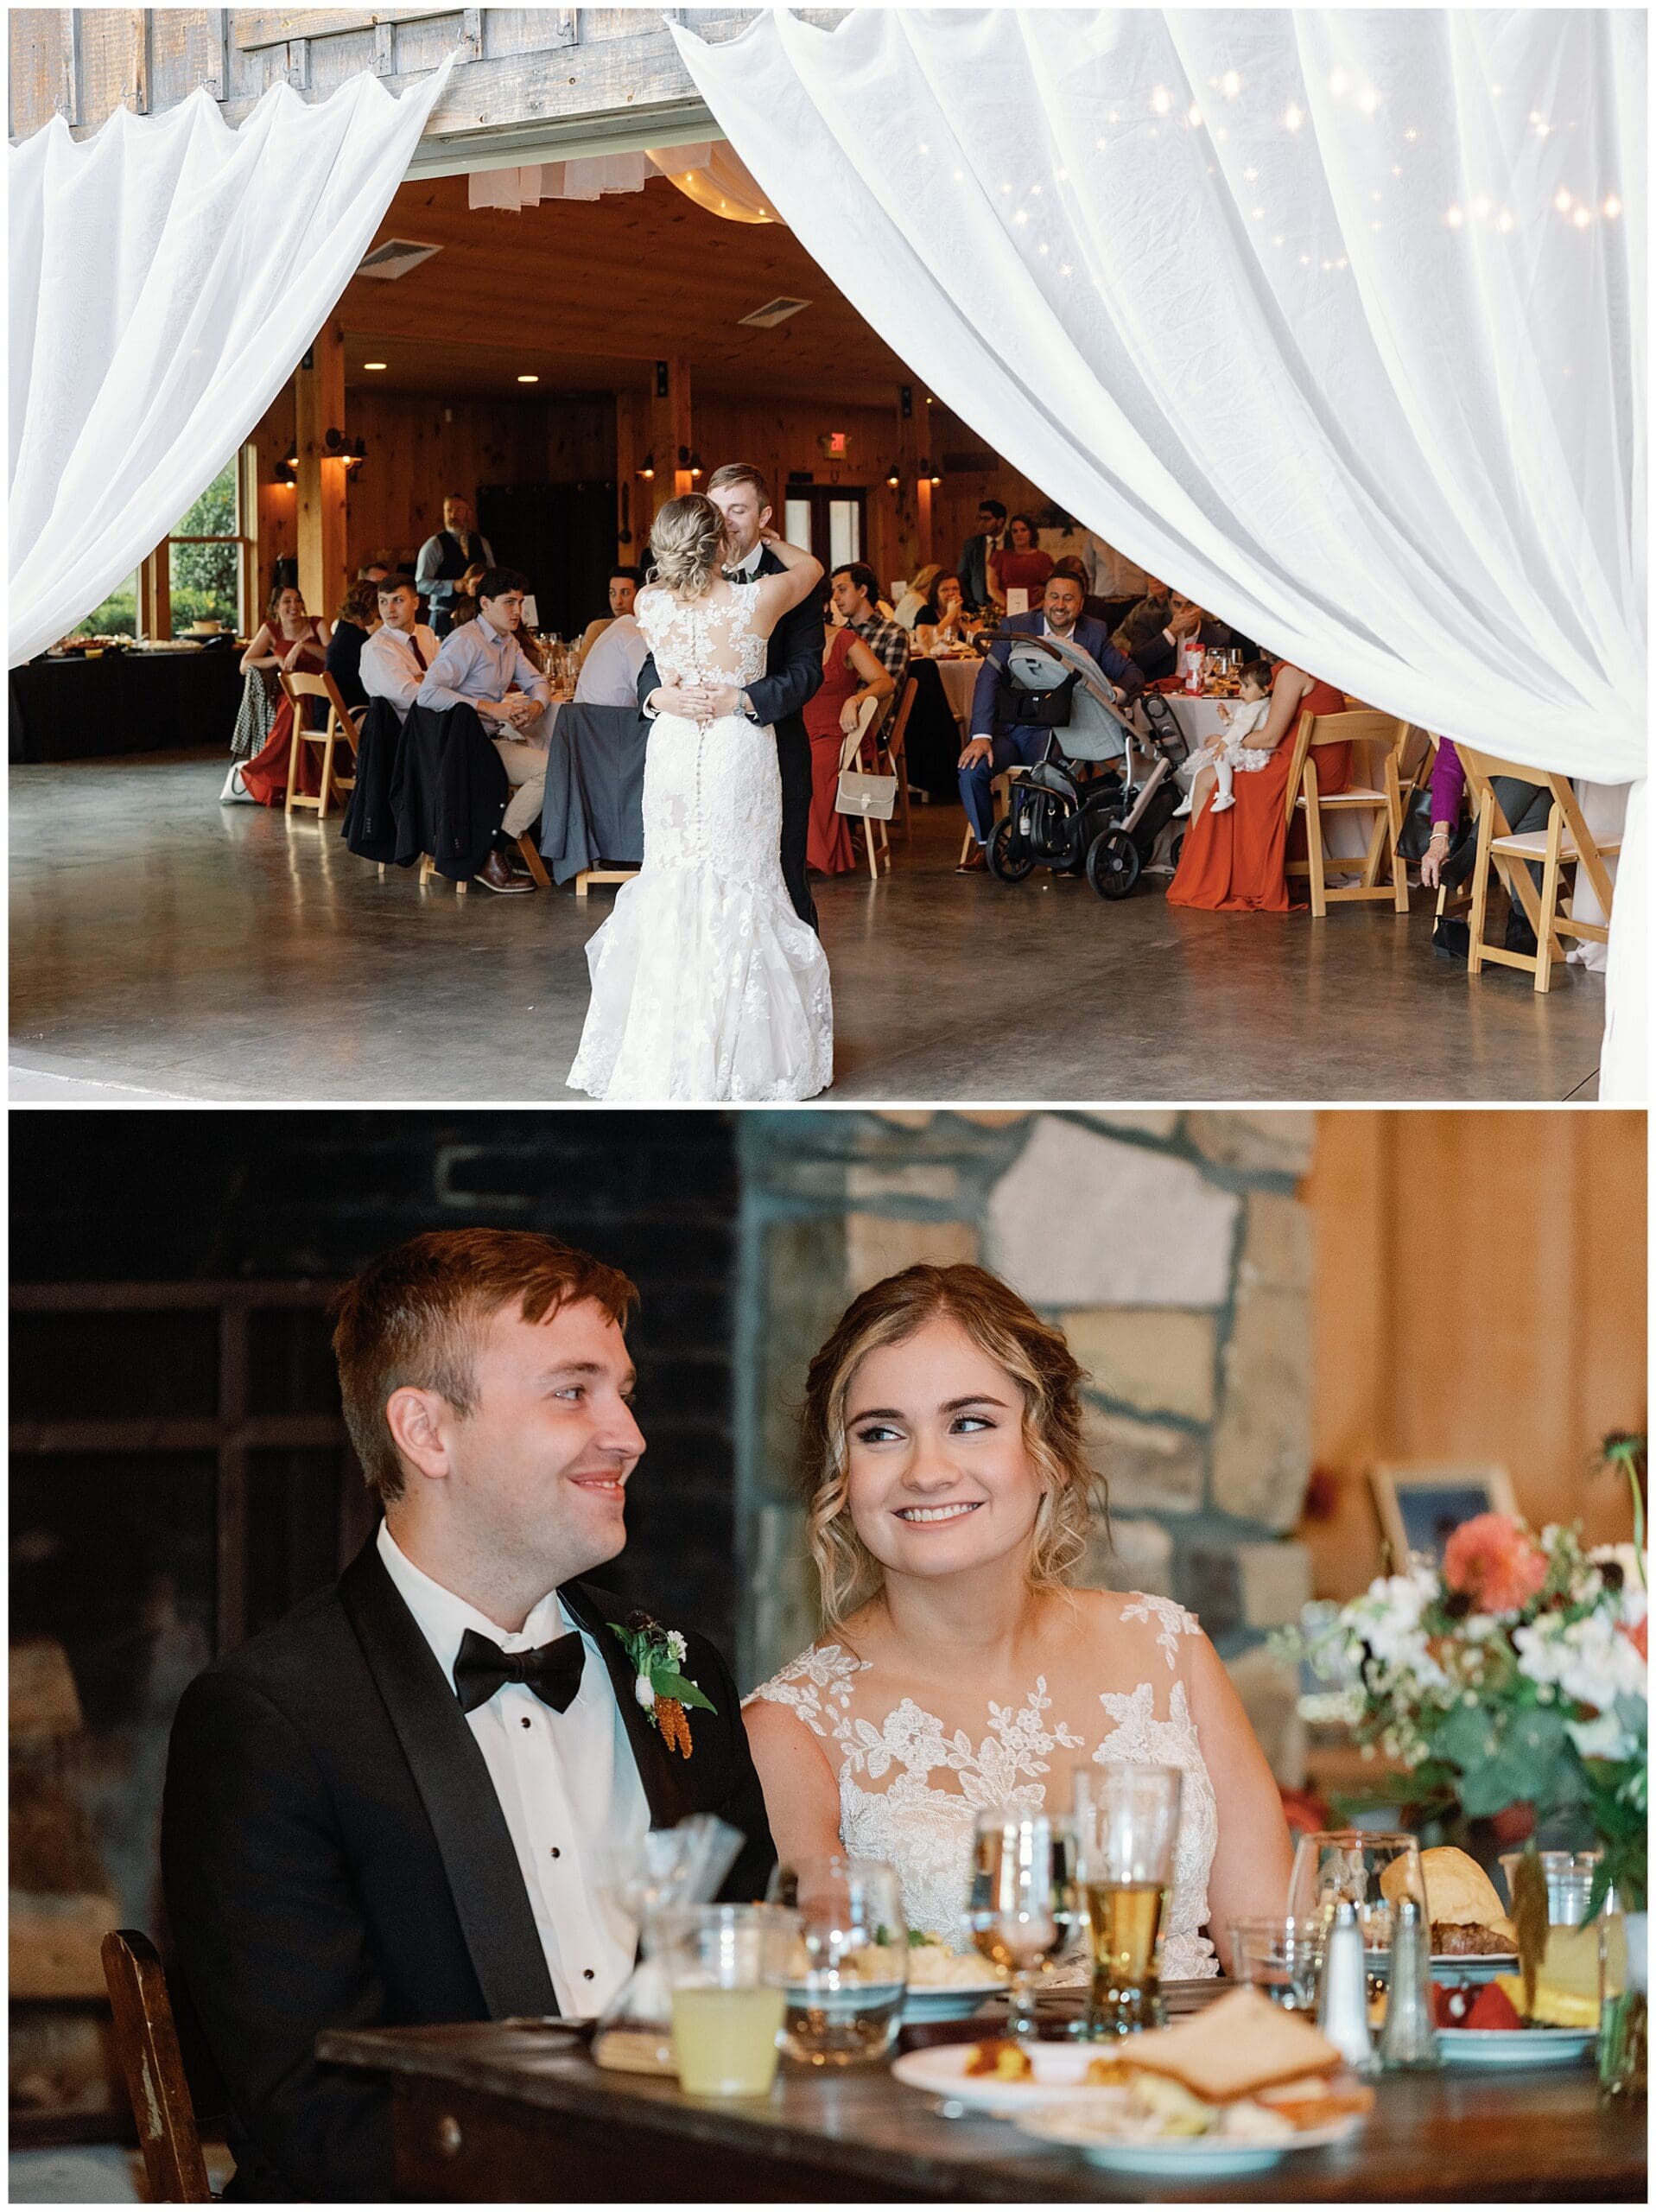 A bride and groom at their wedding reception: the top photo shows the bride dancing with an older man, the bottom photo shows the couple smiling at their table.